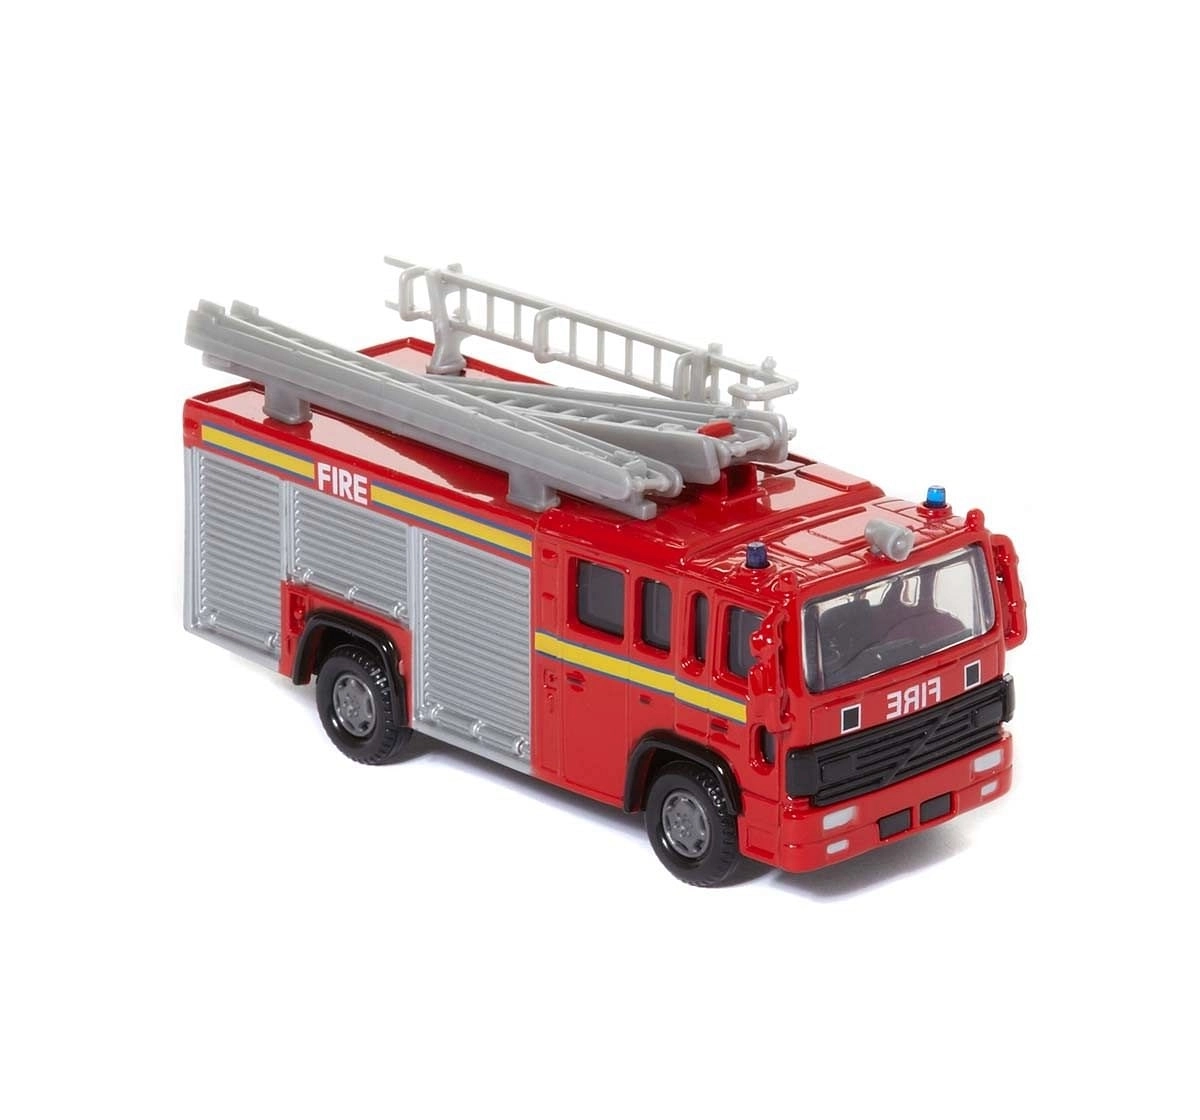 Hamleys Red Fire Engine Multi Color Vehicles for Kids age 3Y+